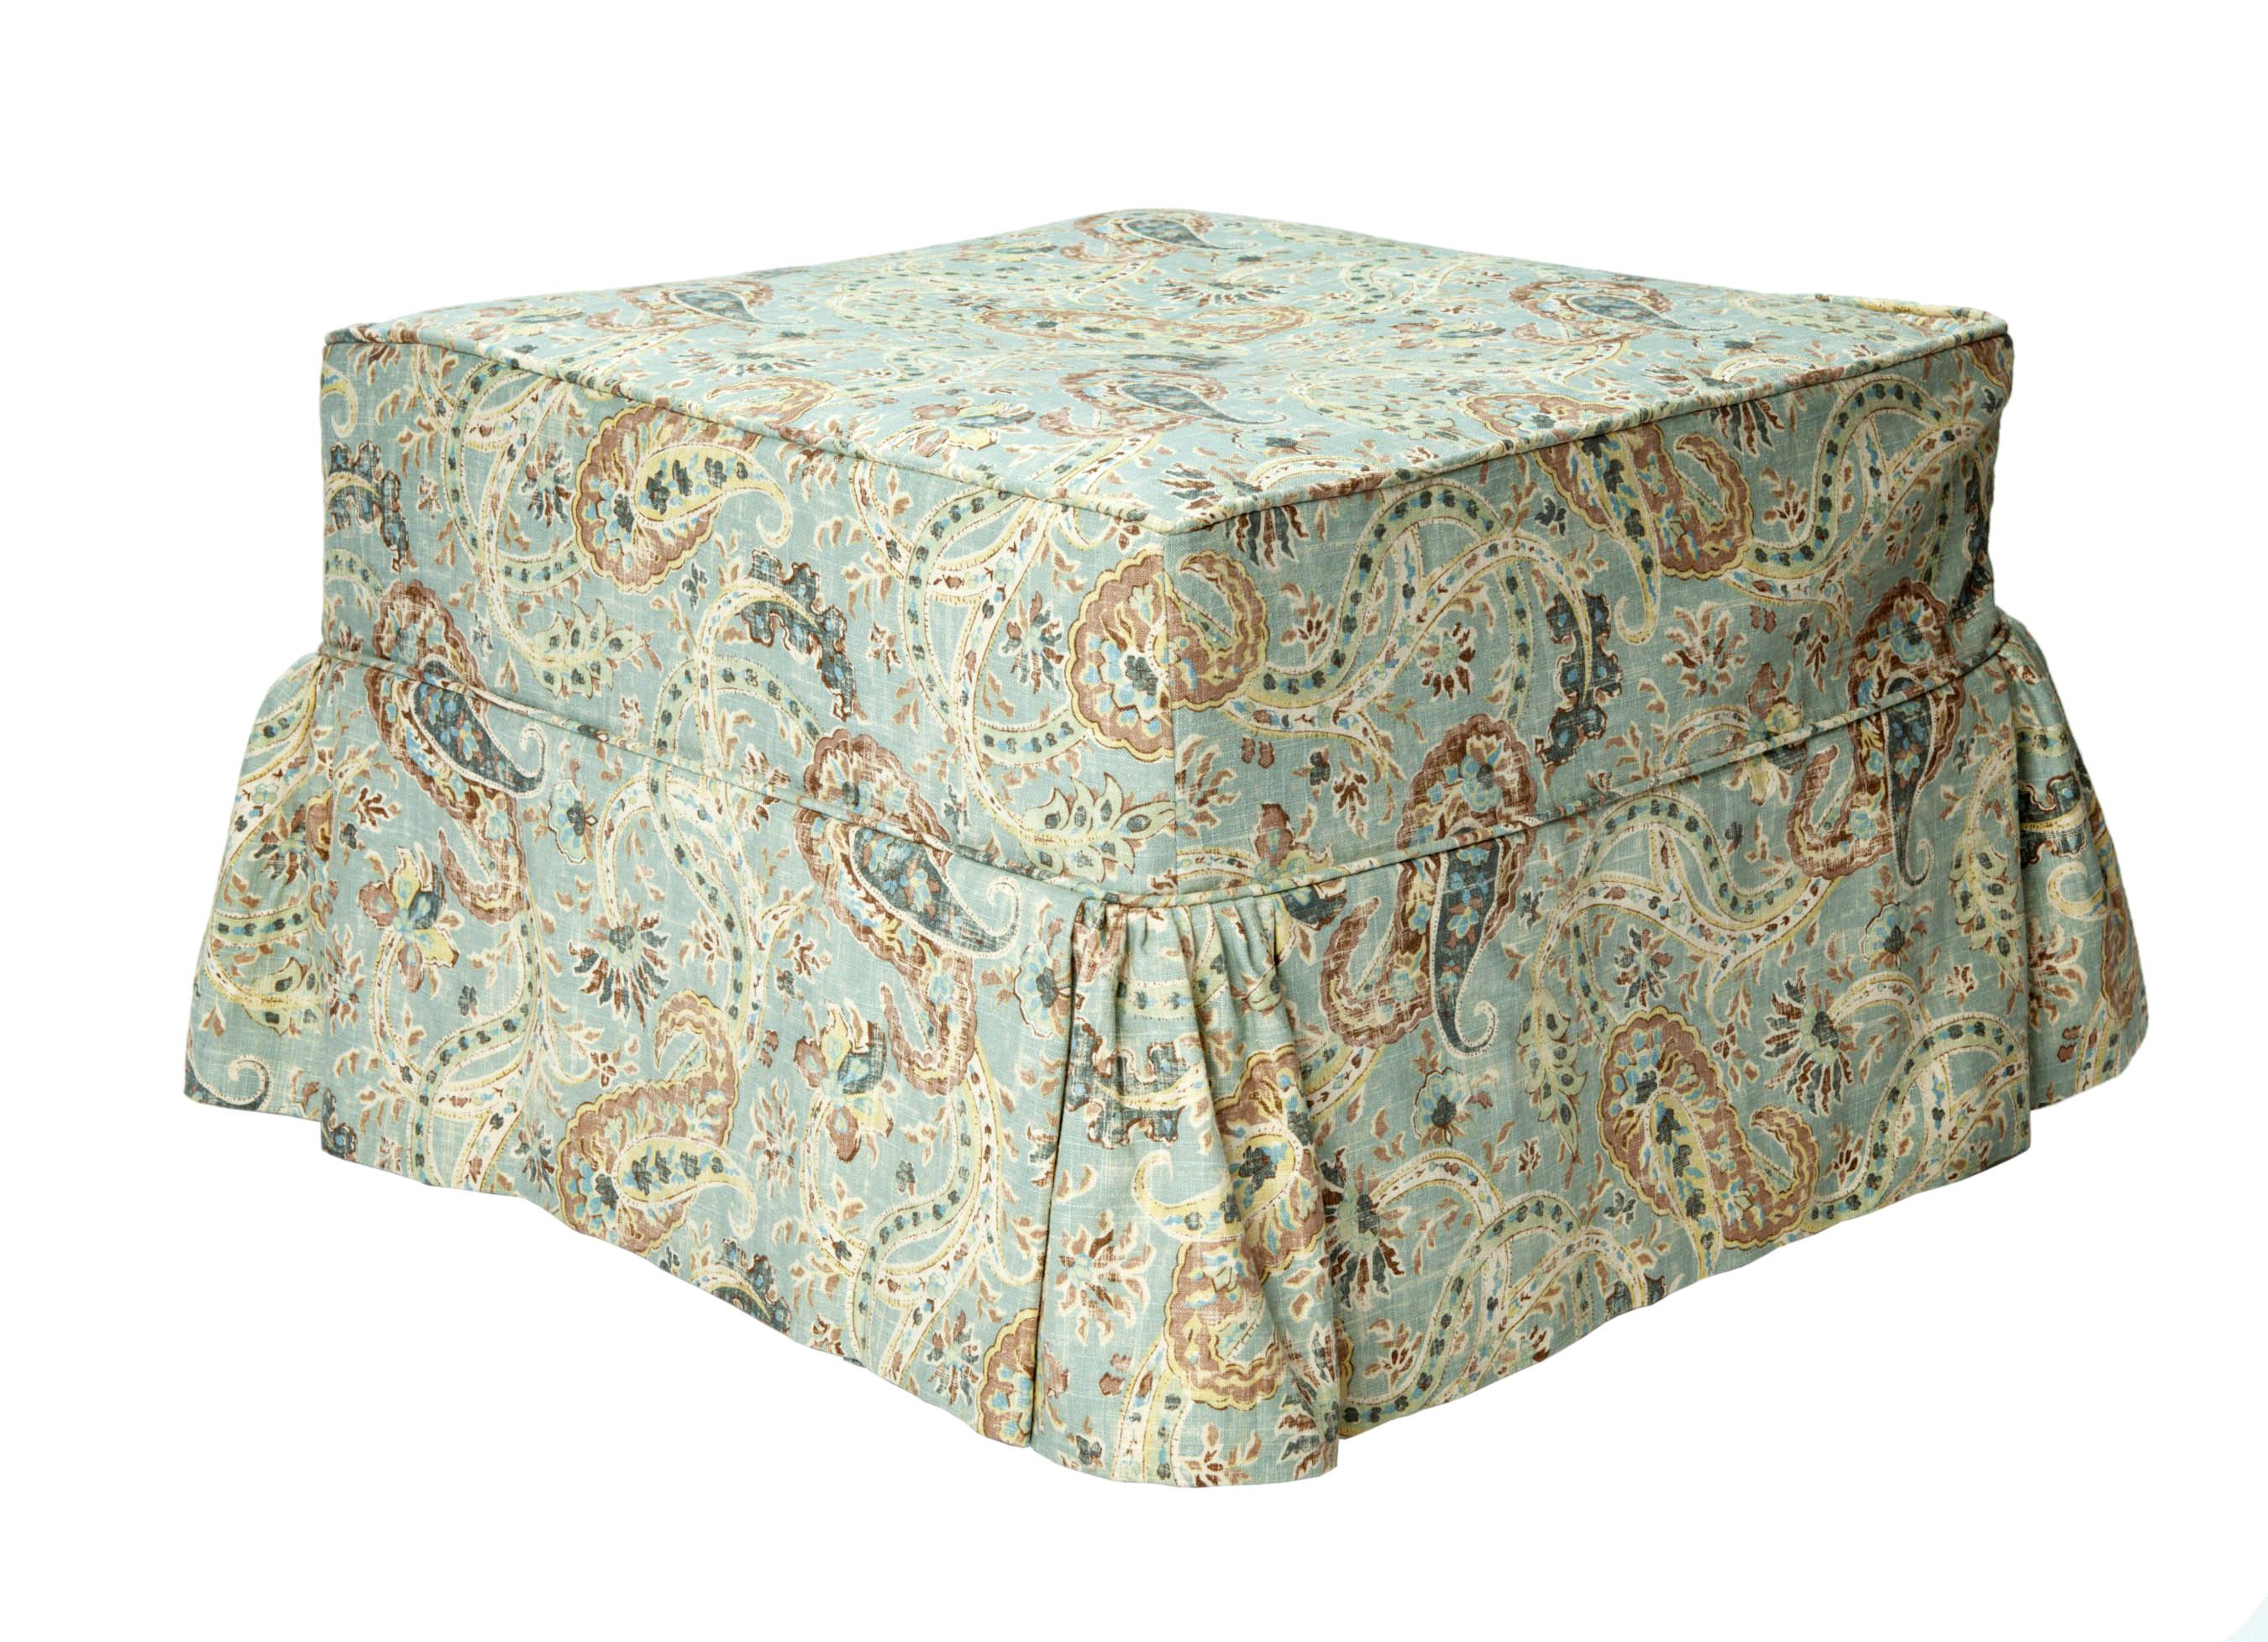 Beautiful square ottoman upholstered in simple beige fabric. On wheel for easy moving.
The fitted slipcover has a skirt with gathered corners. Made in lined paisley linen.
Perfect size to tuck away or use as a coffee table and/or seating.